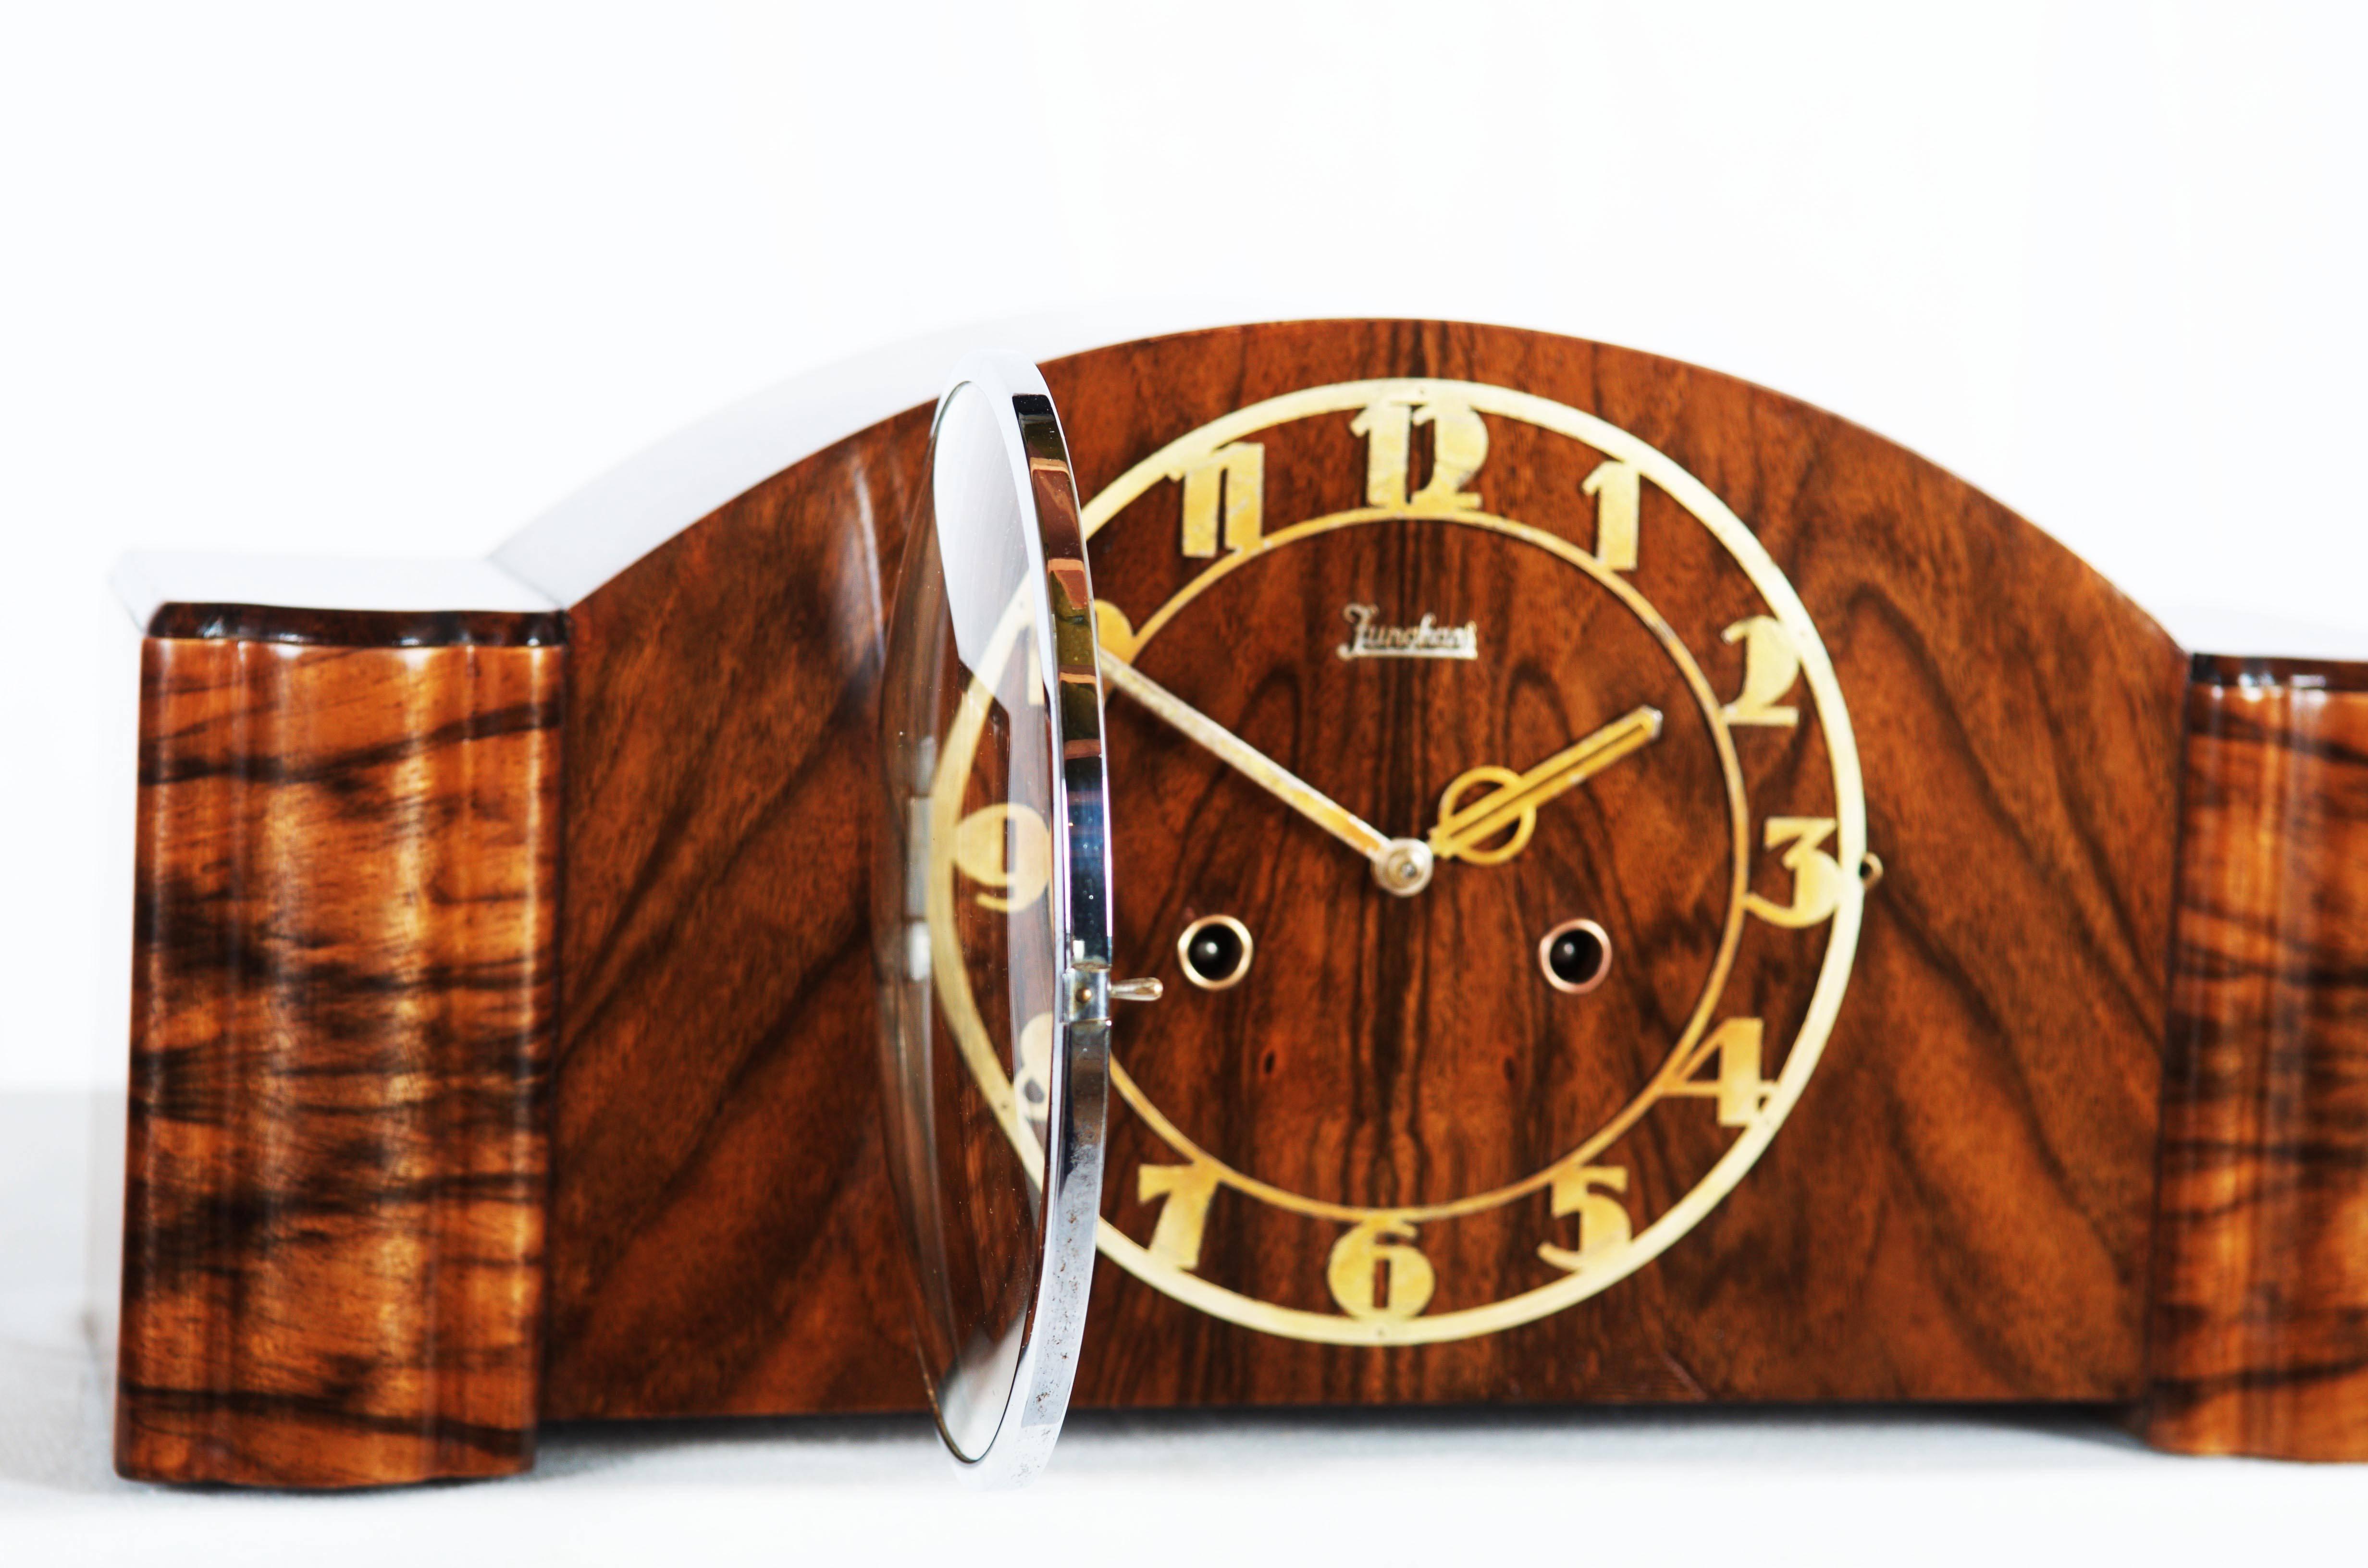 This antique Junghans Art deco mantel clock was designed between the 1920s and 1940s.
It is made from softwood and covered with nut veneer. 
Wood and movement restored